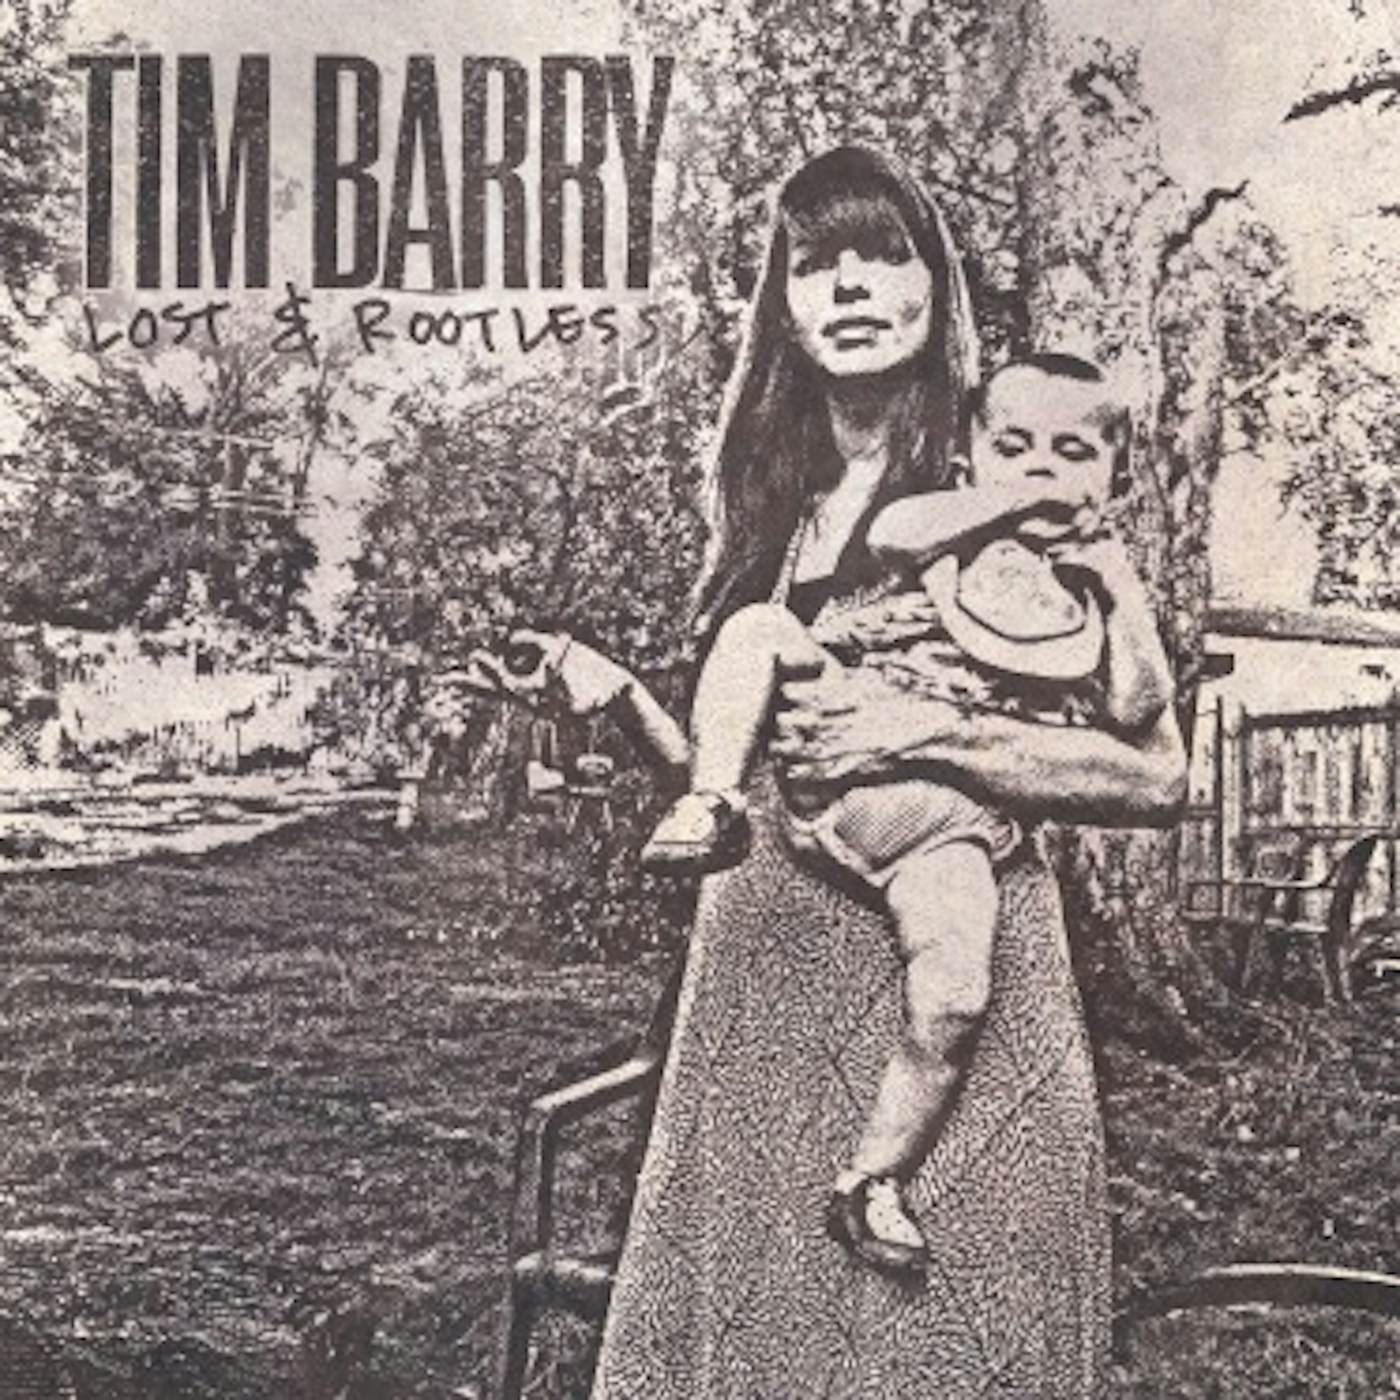 Tim Barry Lost & Rootless Vinyl Record